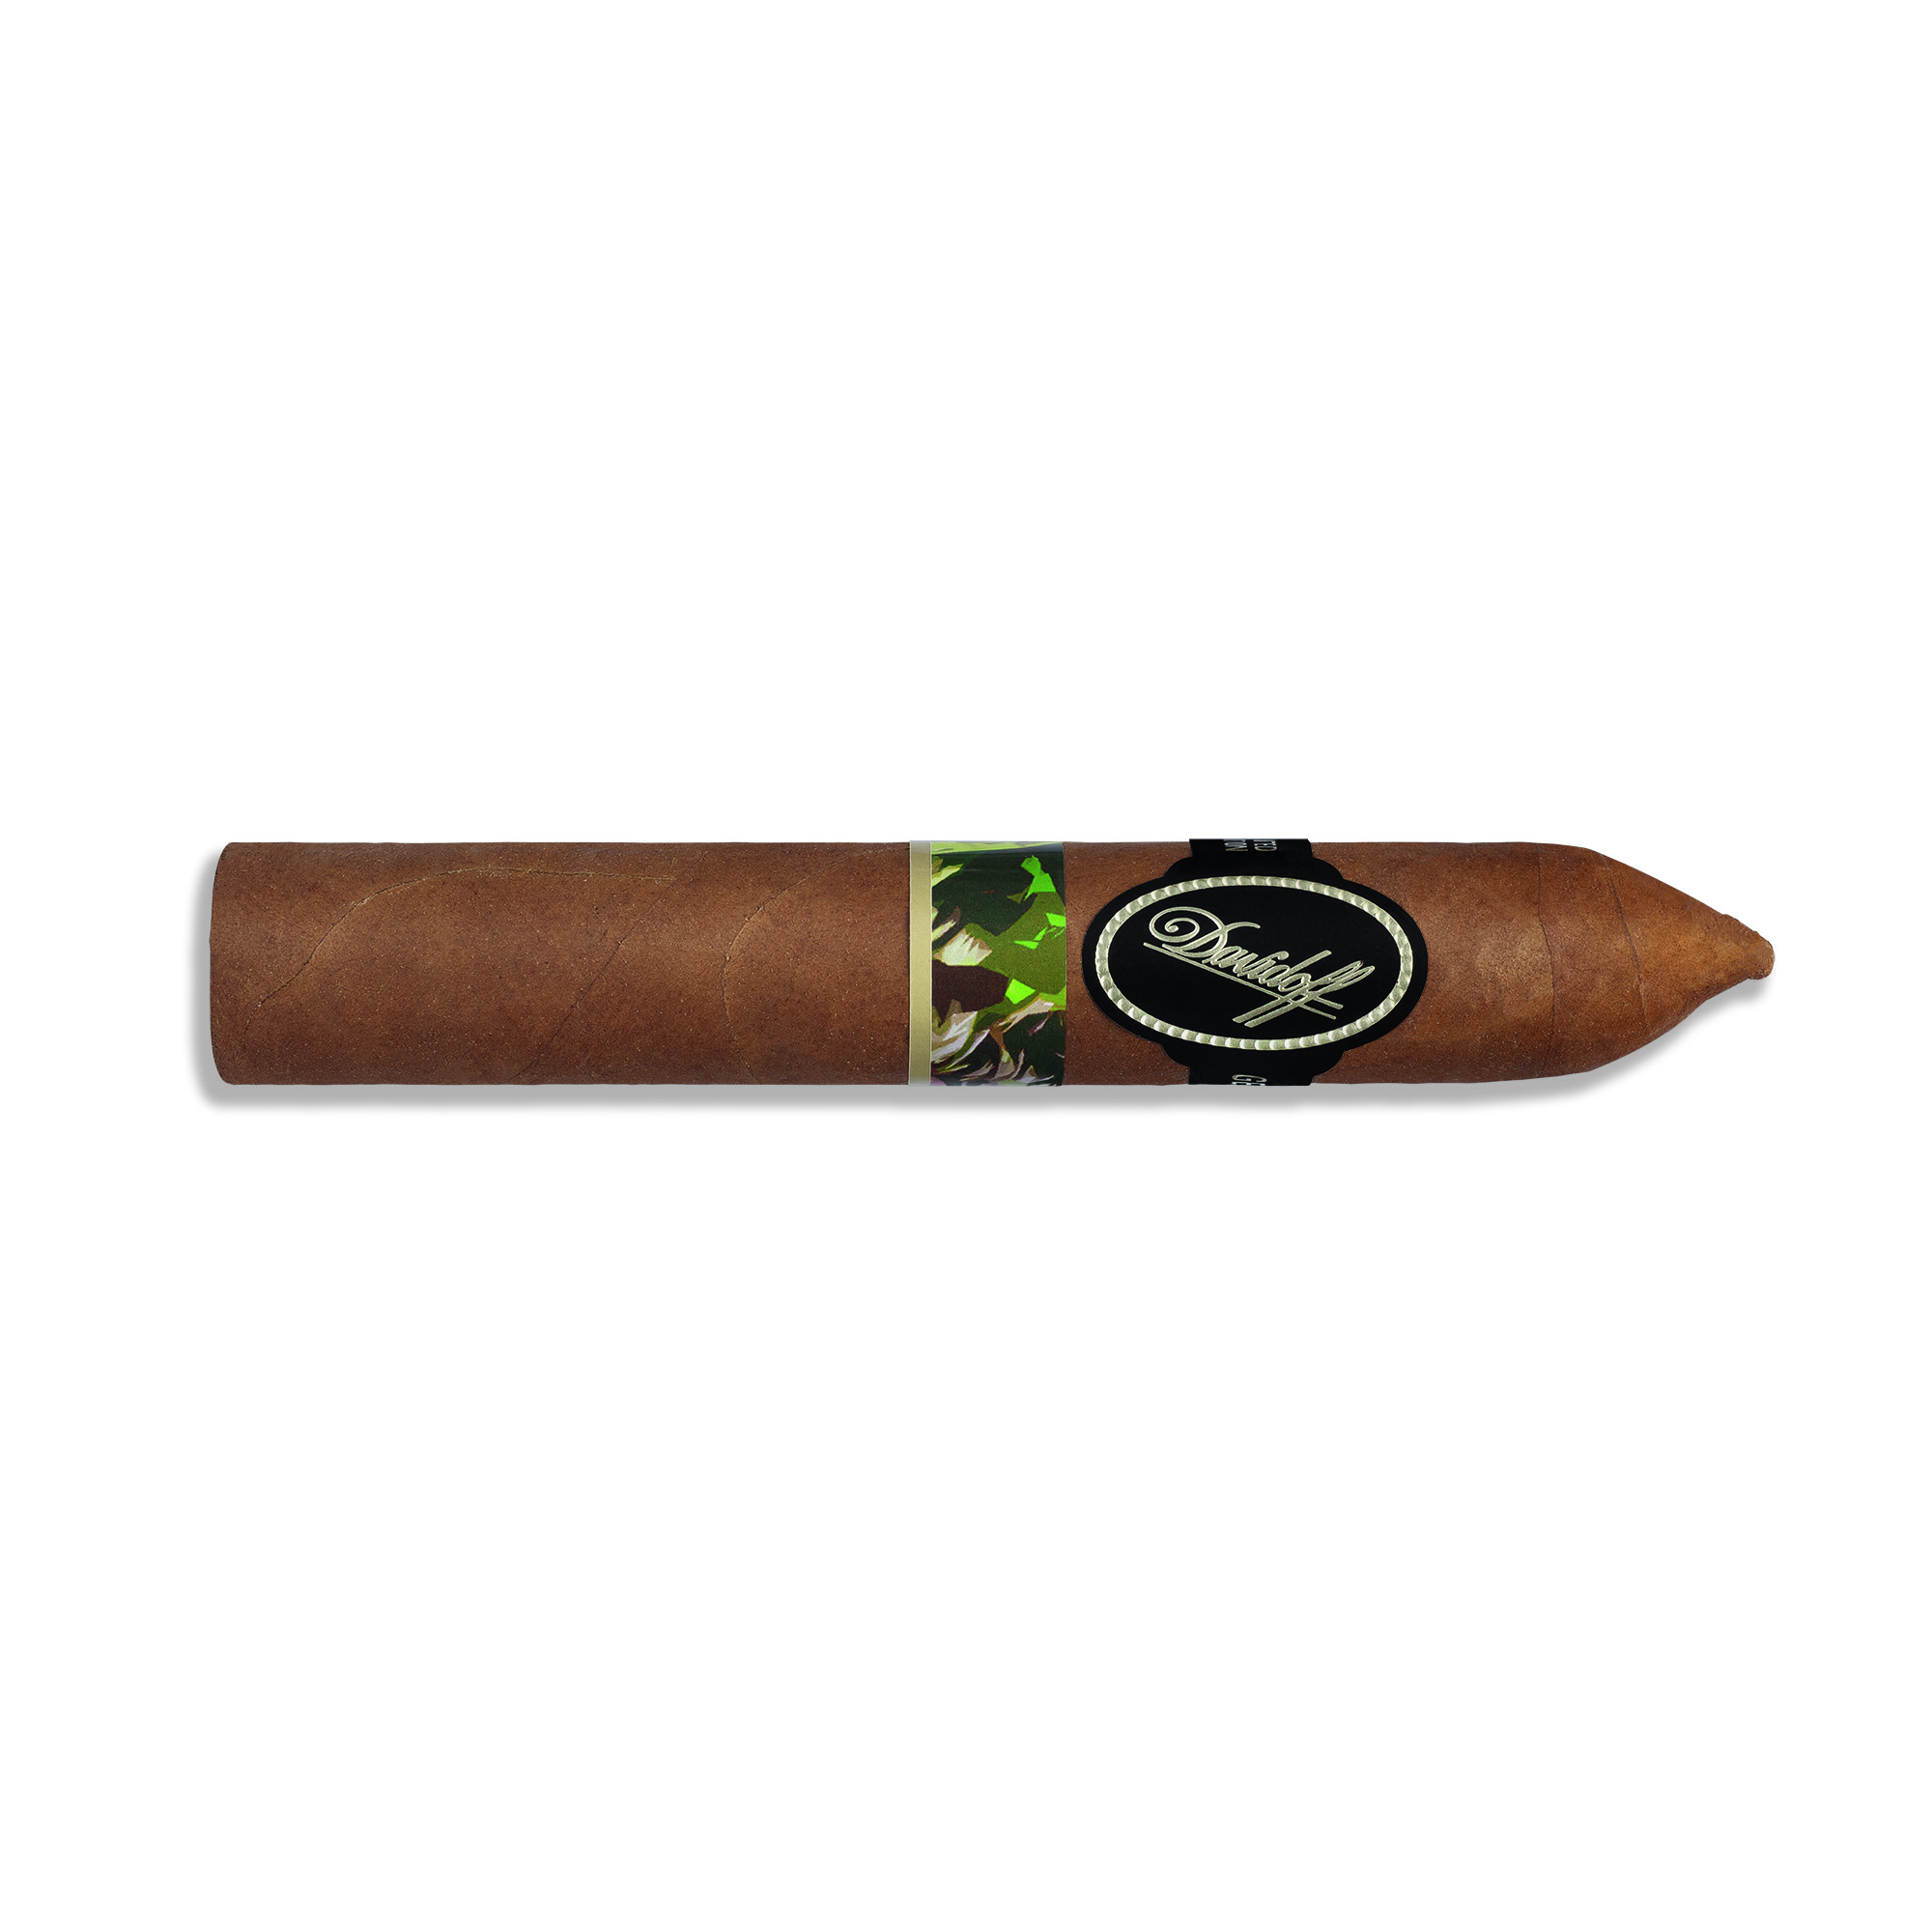 Belicoso terroirs cigars